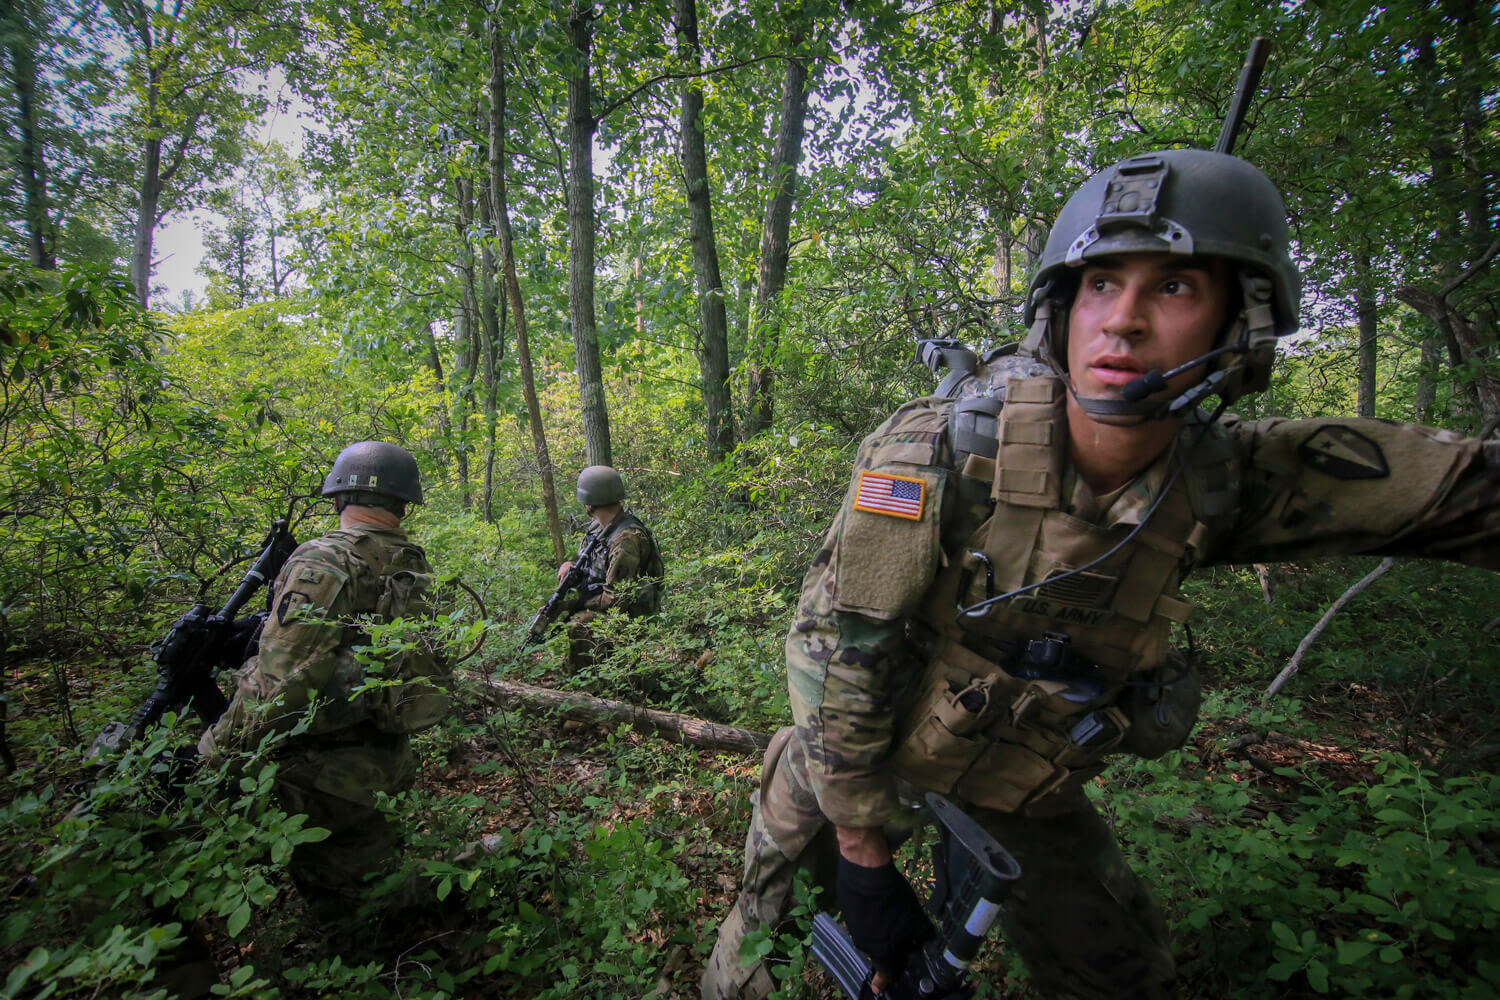 Army National Guard Soldiers from New Jersey’s C Troop, 1st Squadron, 102nd Cavalry Regiment, move tactically through woods en route to an objective as part of a training mission on Joint Base McGuire-Dix-Lakehurst, N.J., June 2018. New Jersey National Guard photo by MSgt Matt Hecht